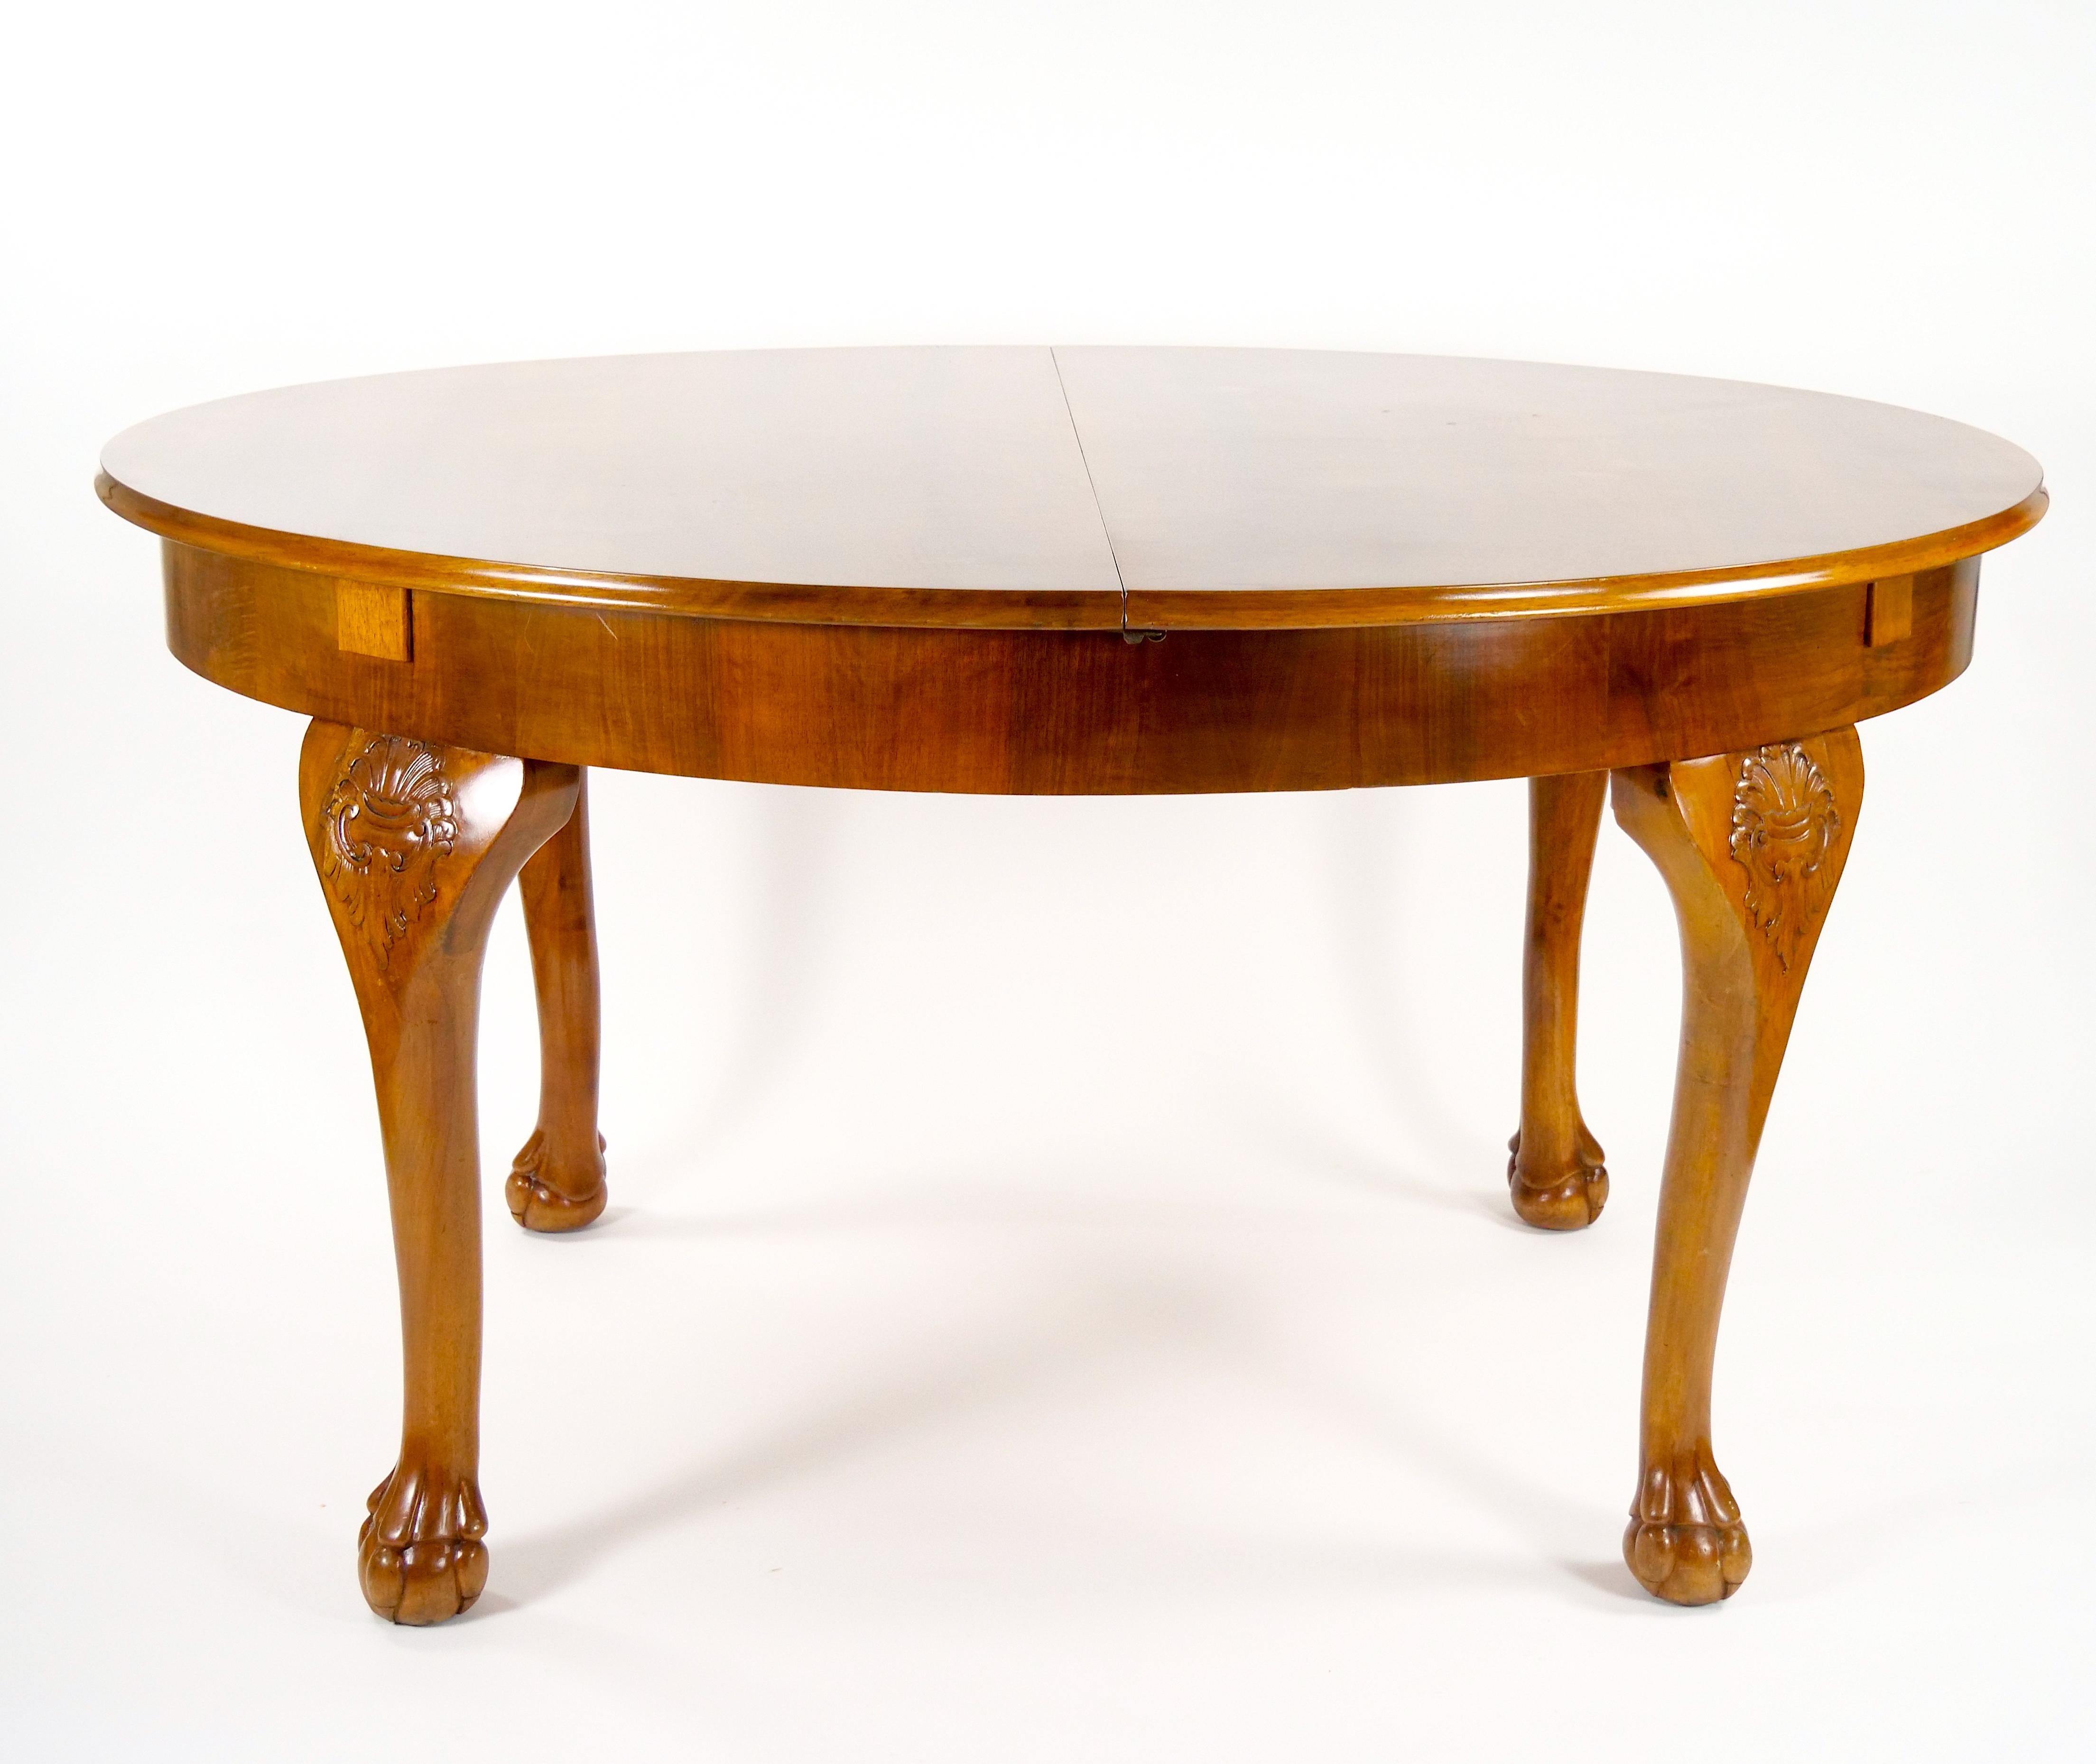 Early 20th Century Italian Hand Carved Walnut Neoclassical Style Dining Table For Sale 8